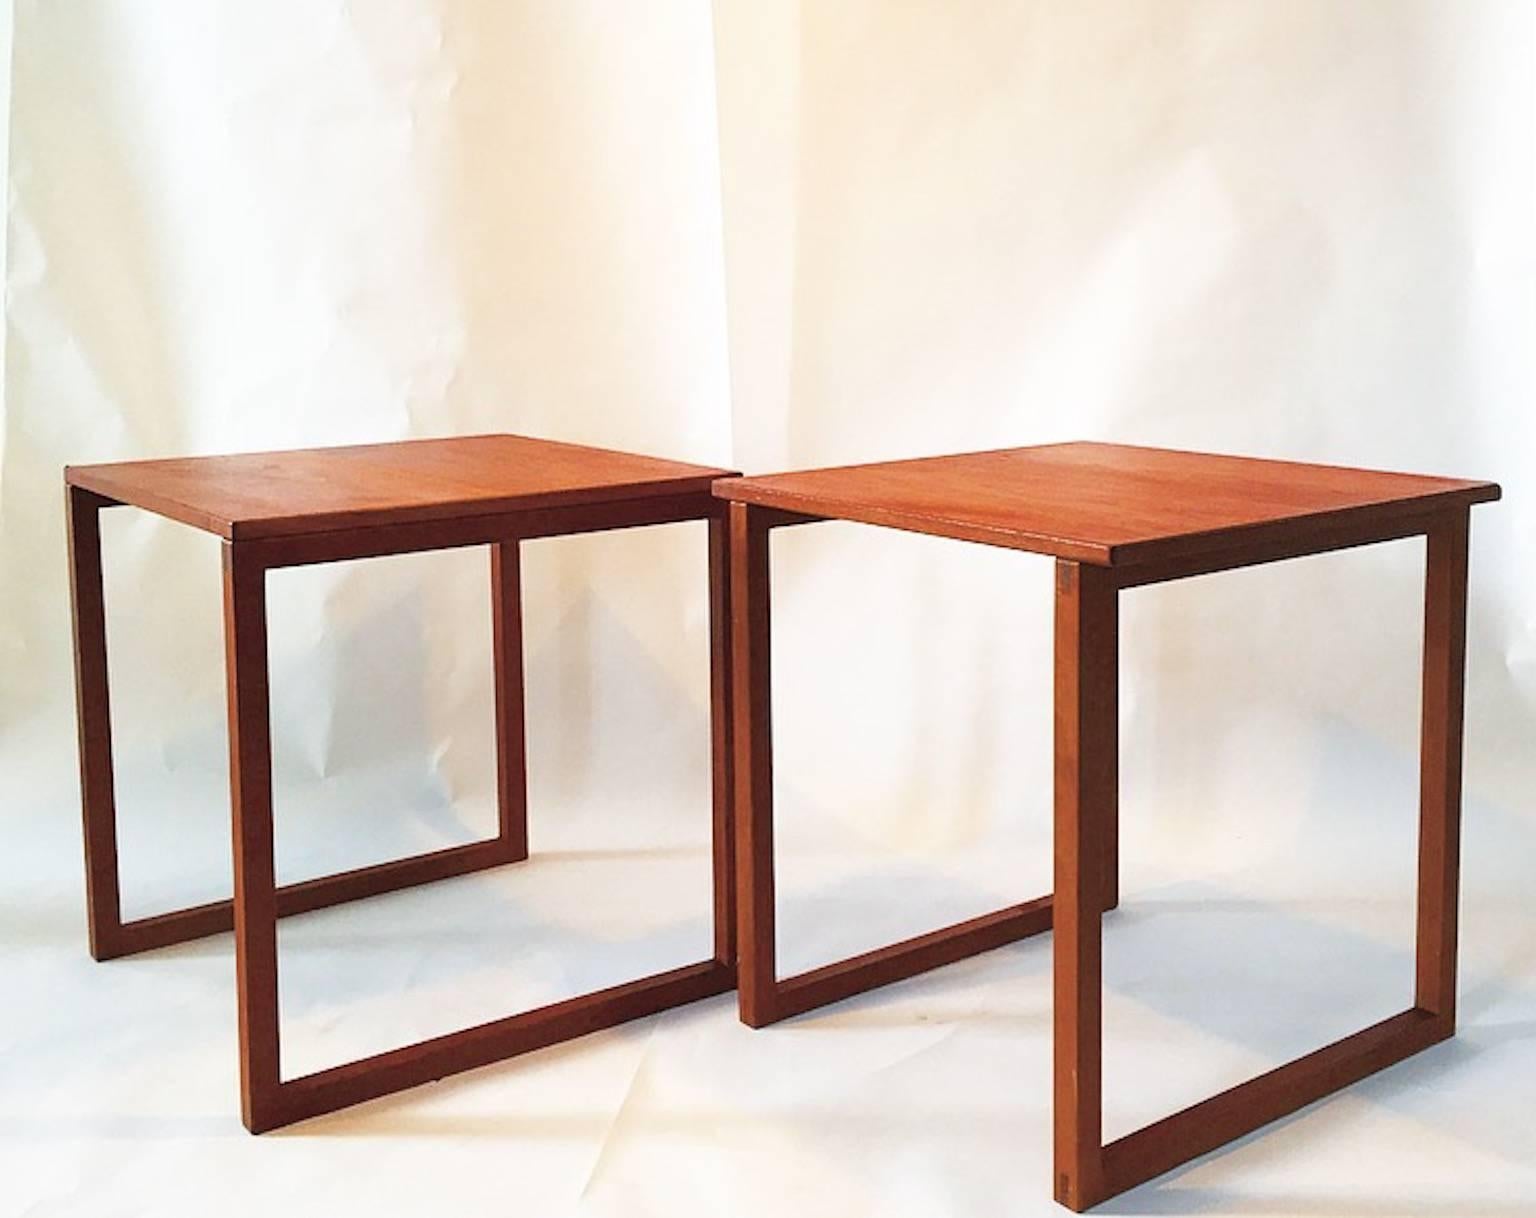 Functionality and craftsmanship are combined into this beautiful cube of teak nesting tables designed by Kai Kristiansen for VM - Vildbjerg Møbelfabrik in the 1960s. 

The two tables slide perfectly into each other and form a cube perfect for a